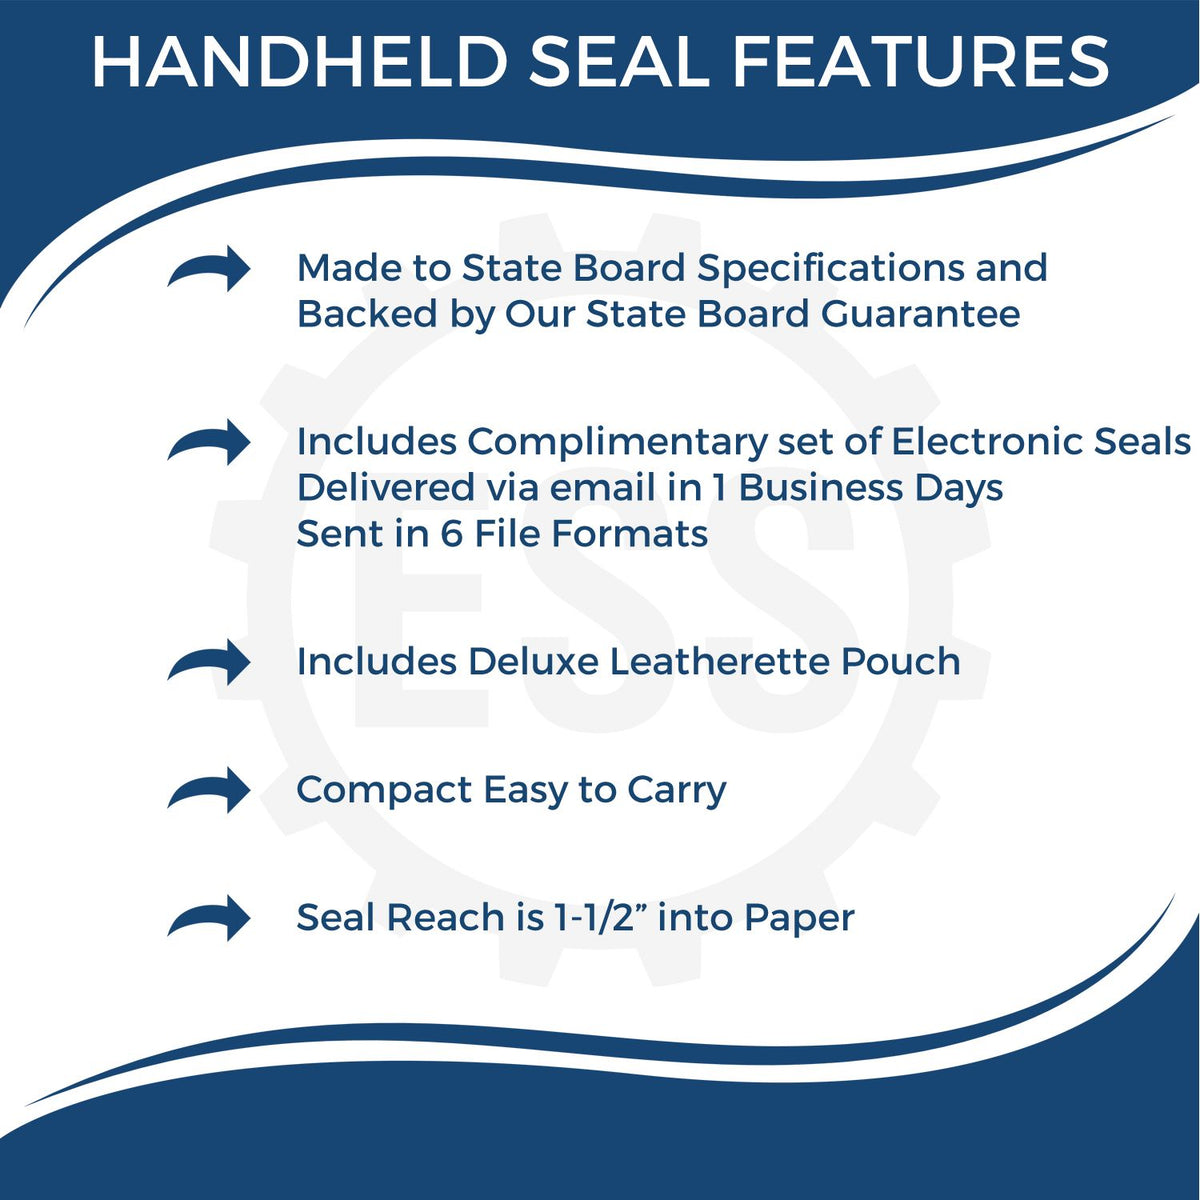 A picture of an infographic highlighting the selling points for the Handheld Idaho Land Surveyor Seal